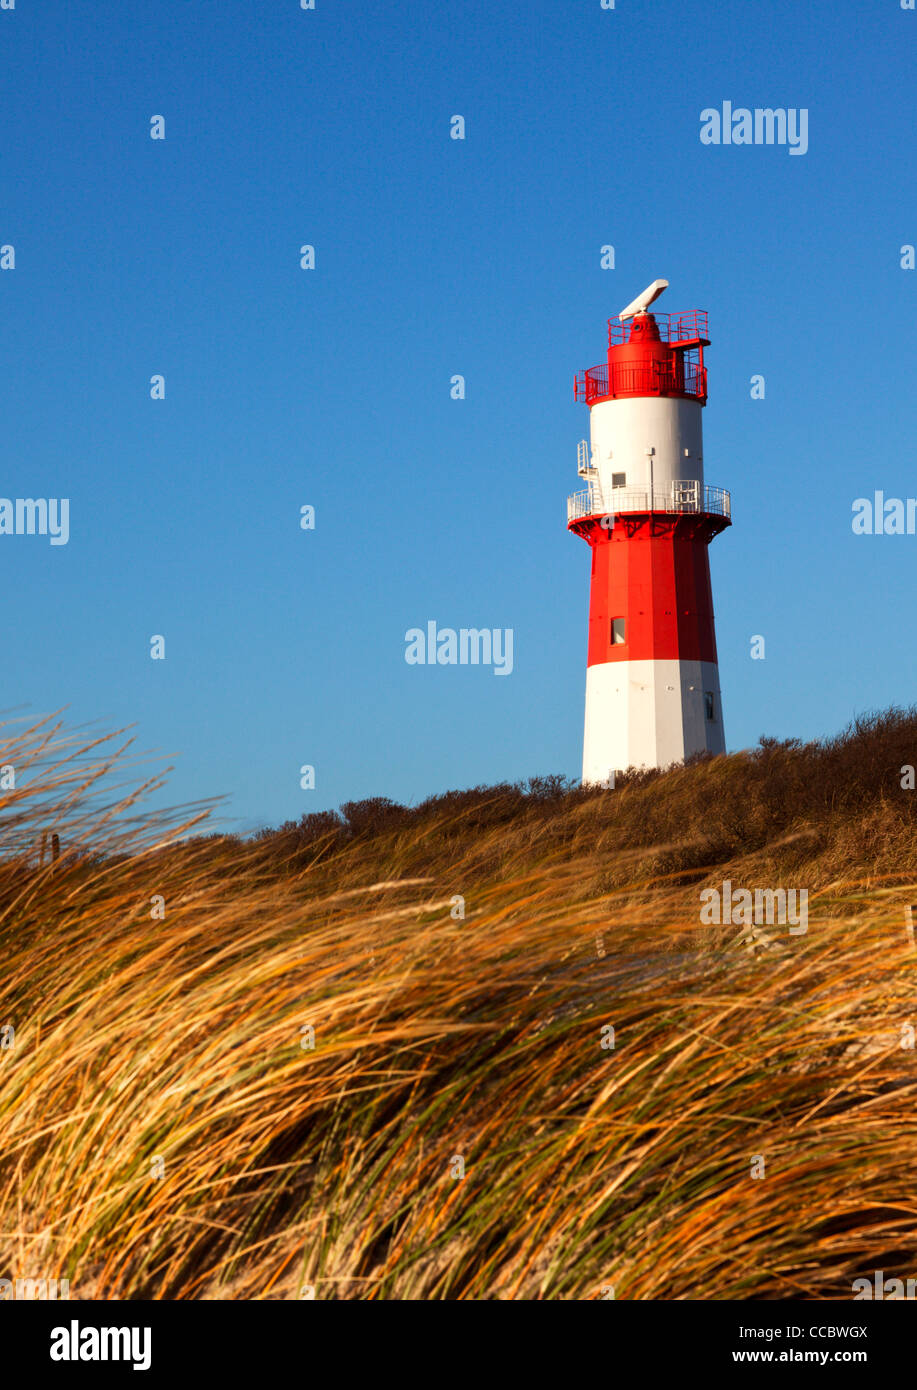 small lighthouse on the southern beach of Borkum, dune grass in foreground Stock Photo